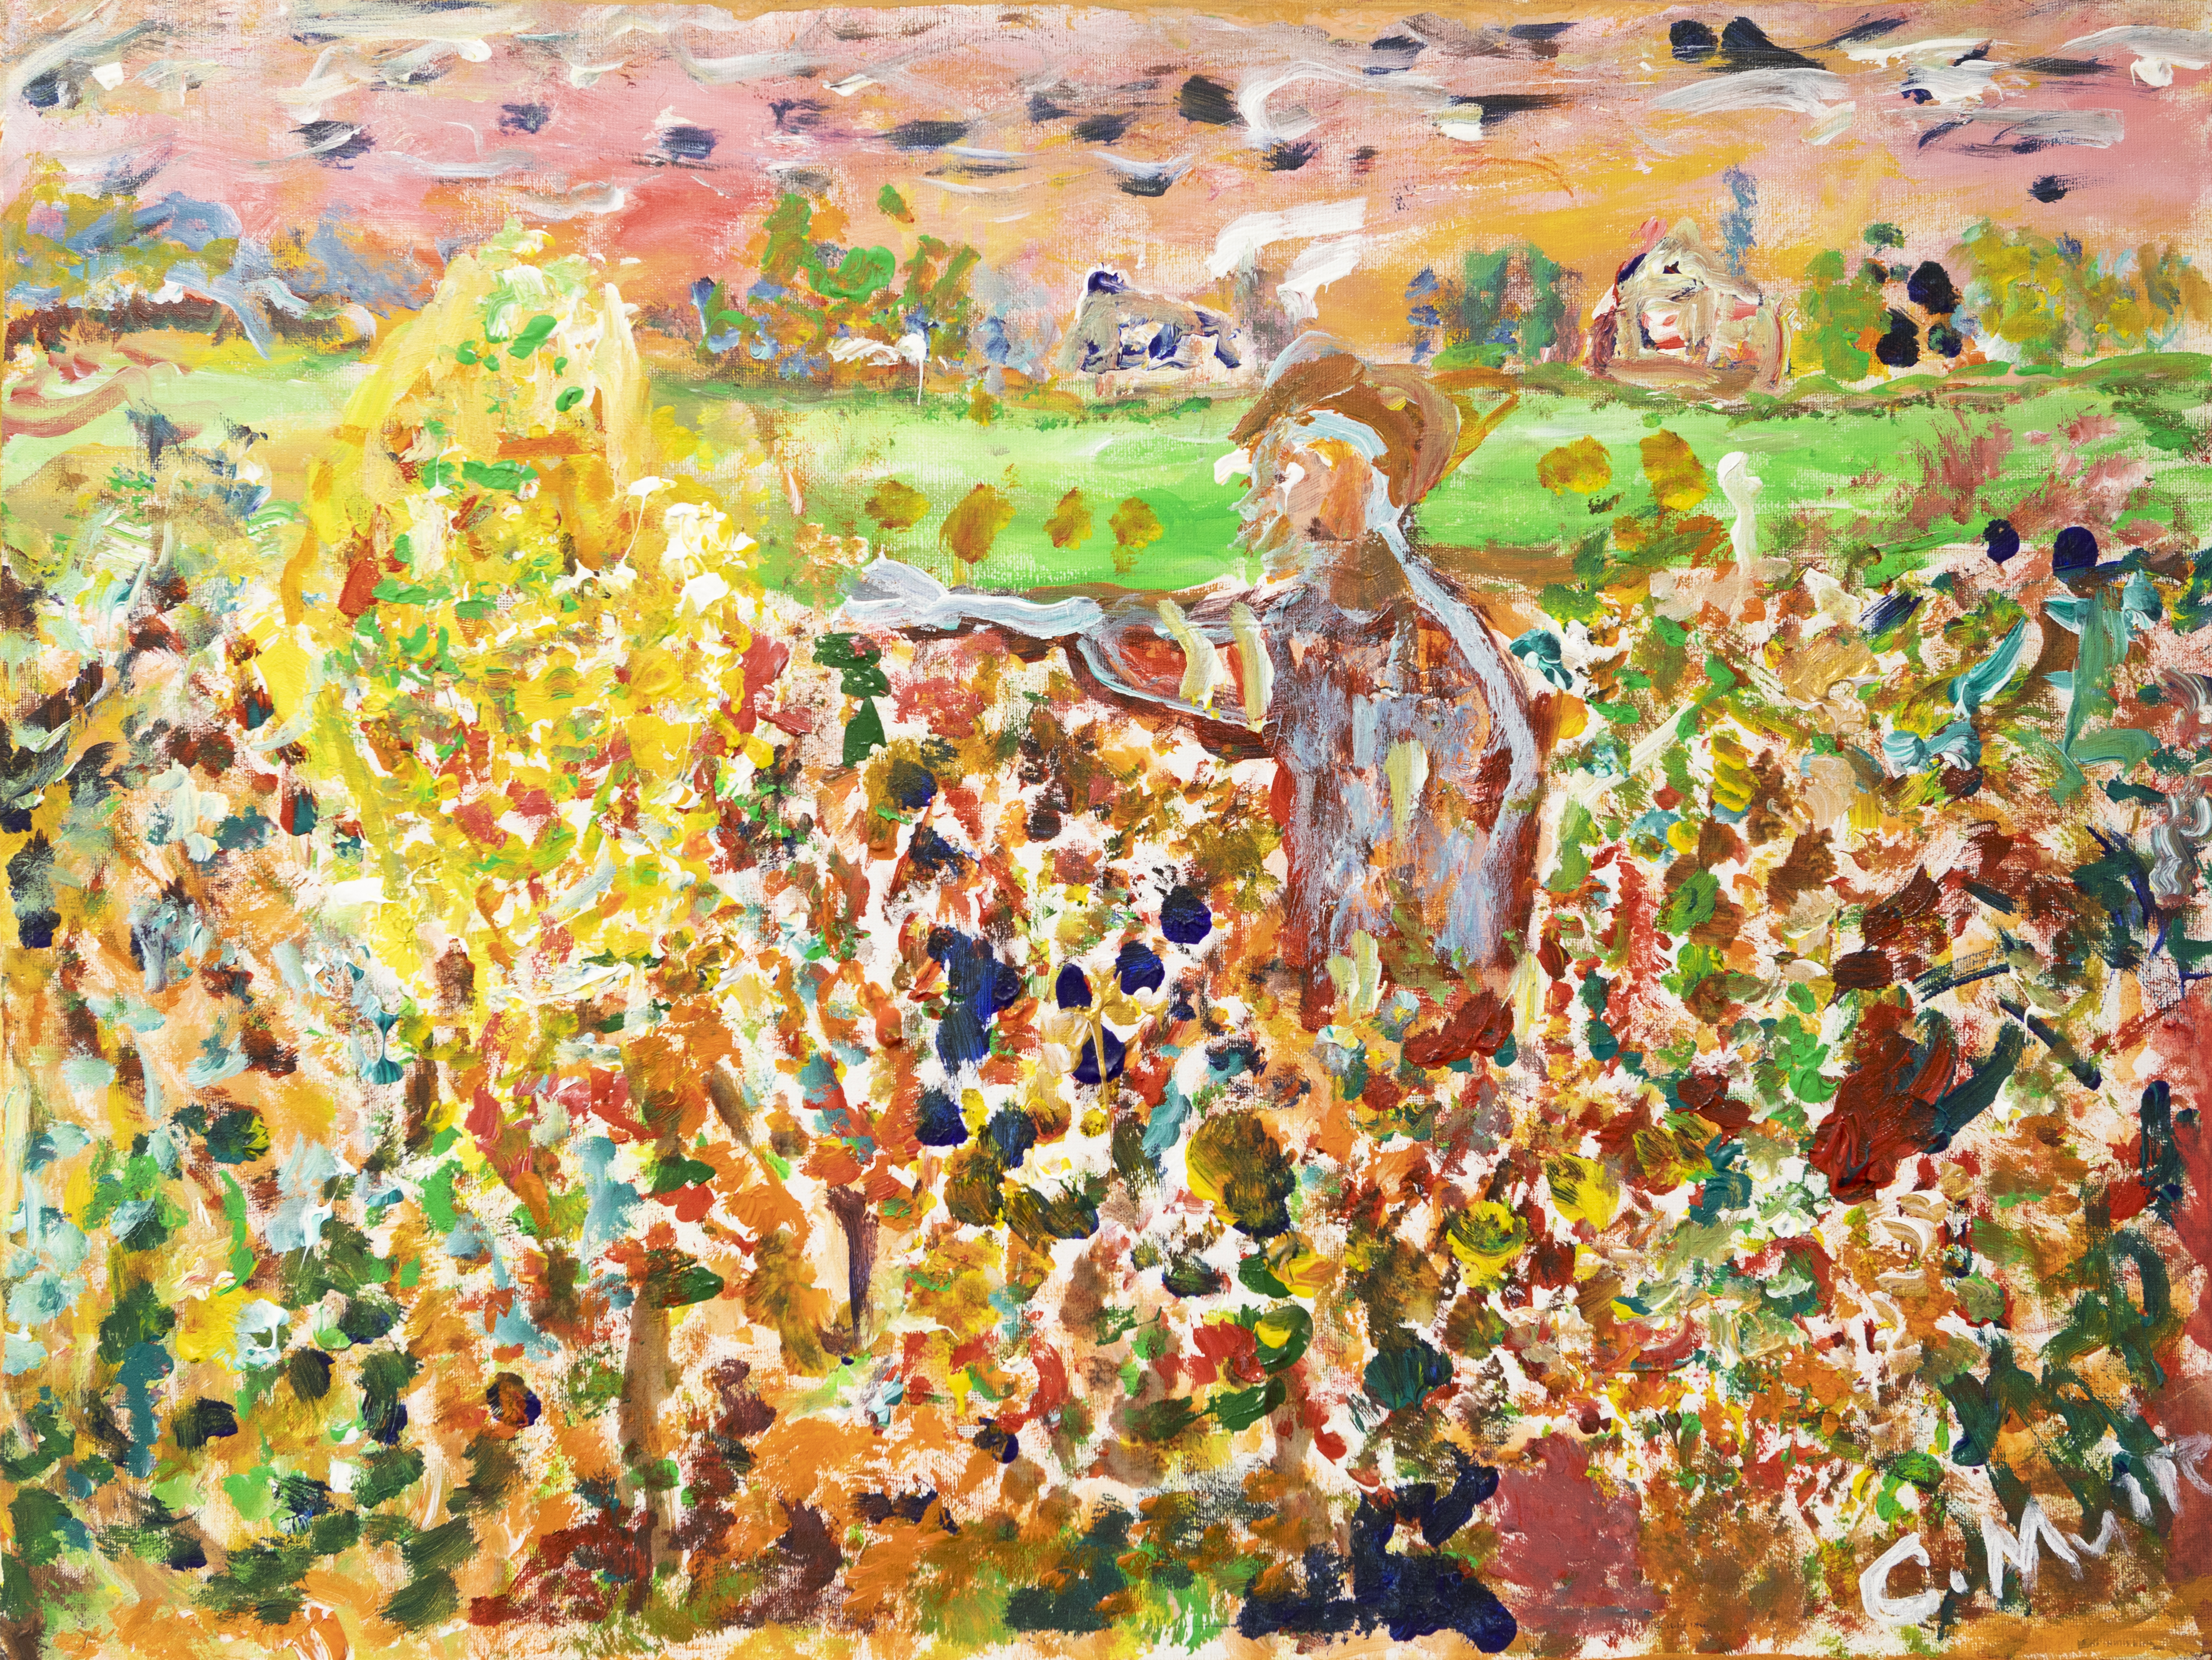 A man stands in a field of flowers, painted in expressive dots.